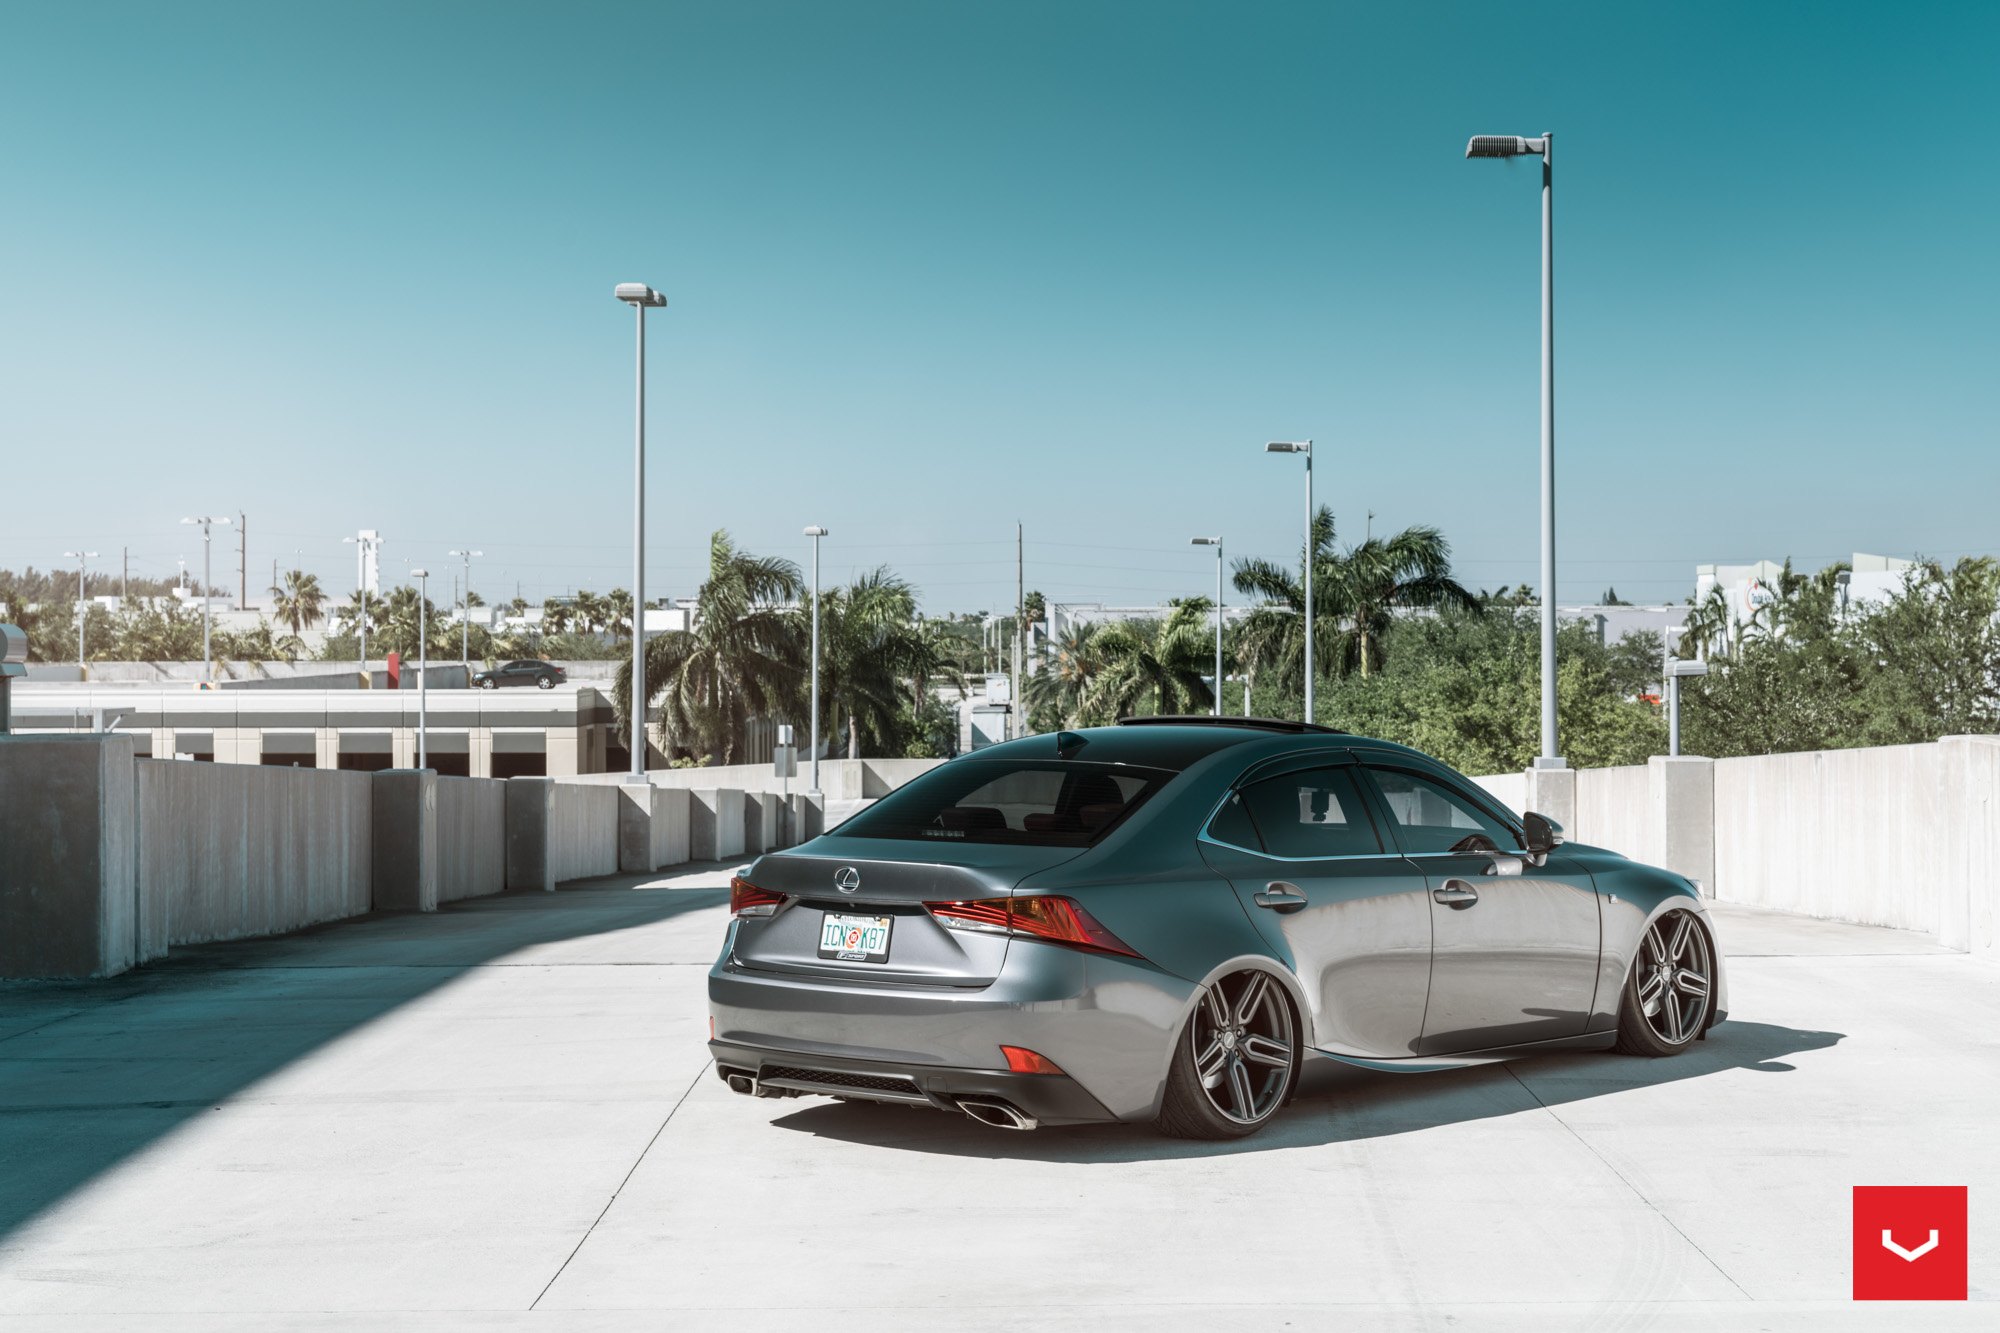 Gray Lexus IS F with Custom Rear Diffuser - Photo by Vossen